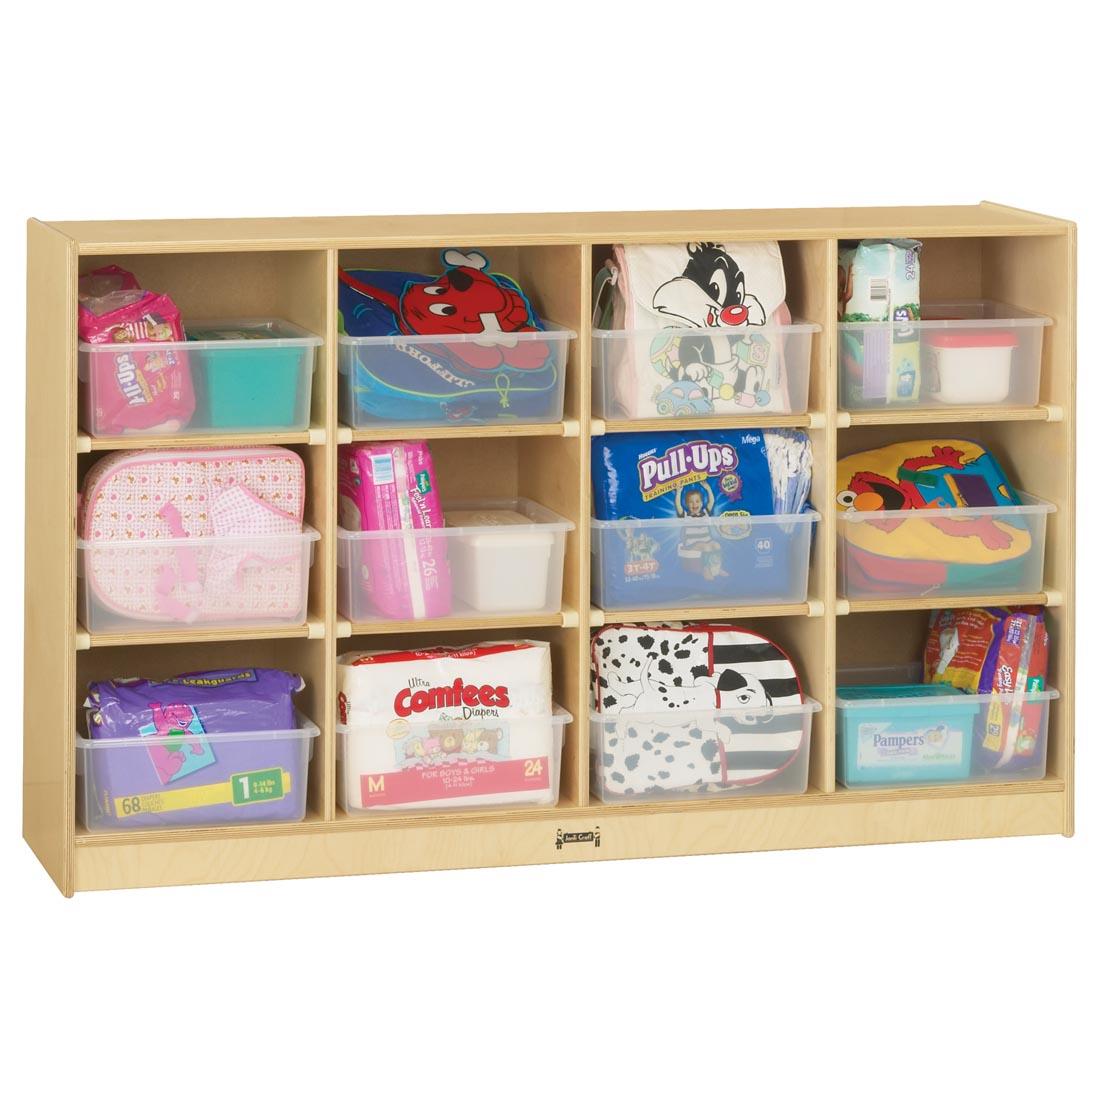 Cubby Organization Center With Clear Tubs shown with suggested storage contents